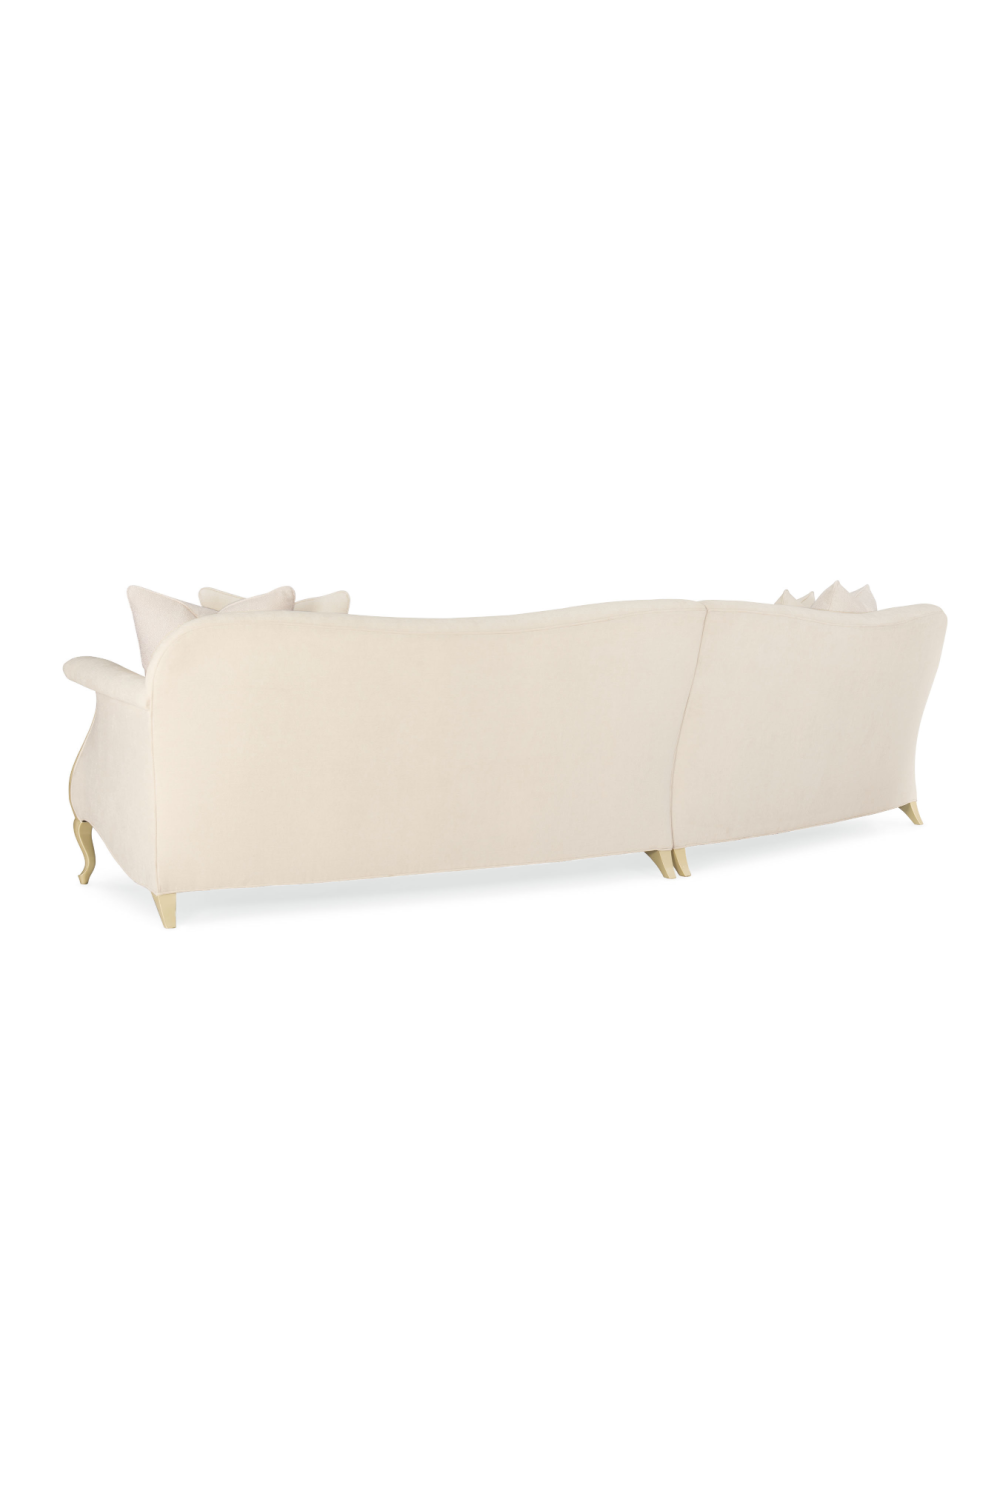 Scrolled Arm Loveseat | Caracole Two To Tango | Oroa.com